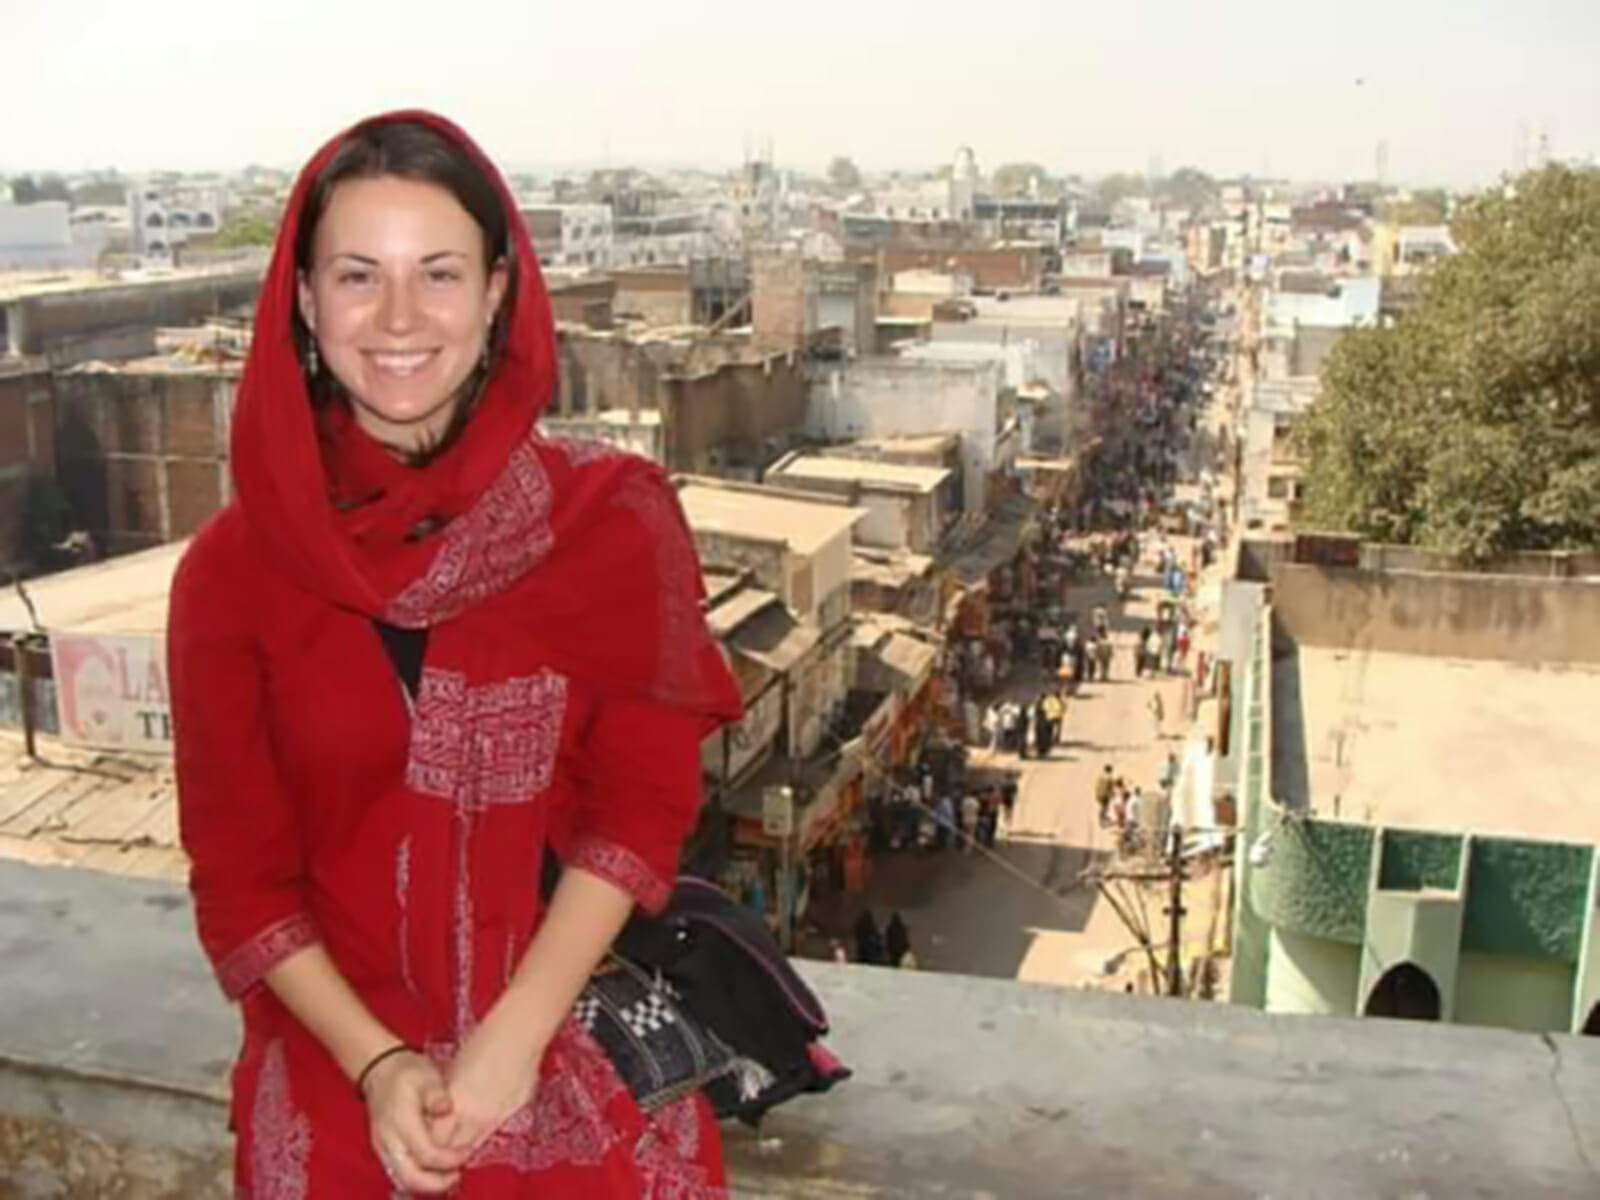 Laura McWilliams is leaning against a concrete railing, which overlooks a busy city street in India, full of people and stalls.